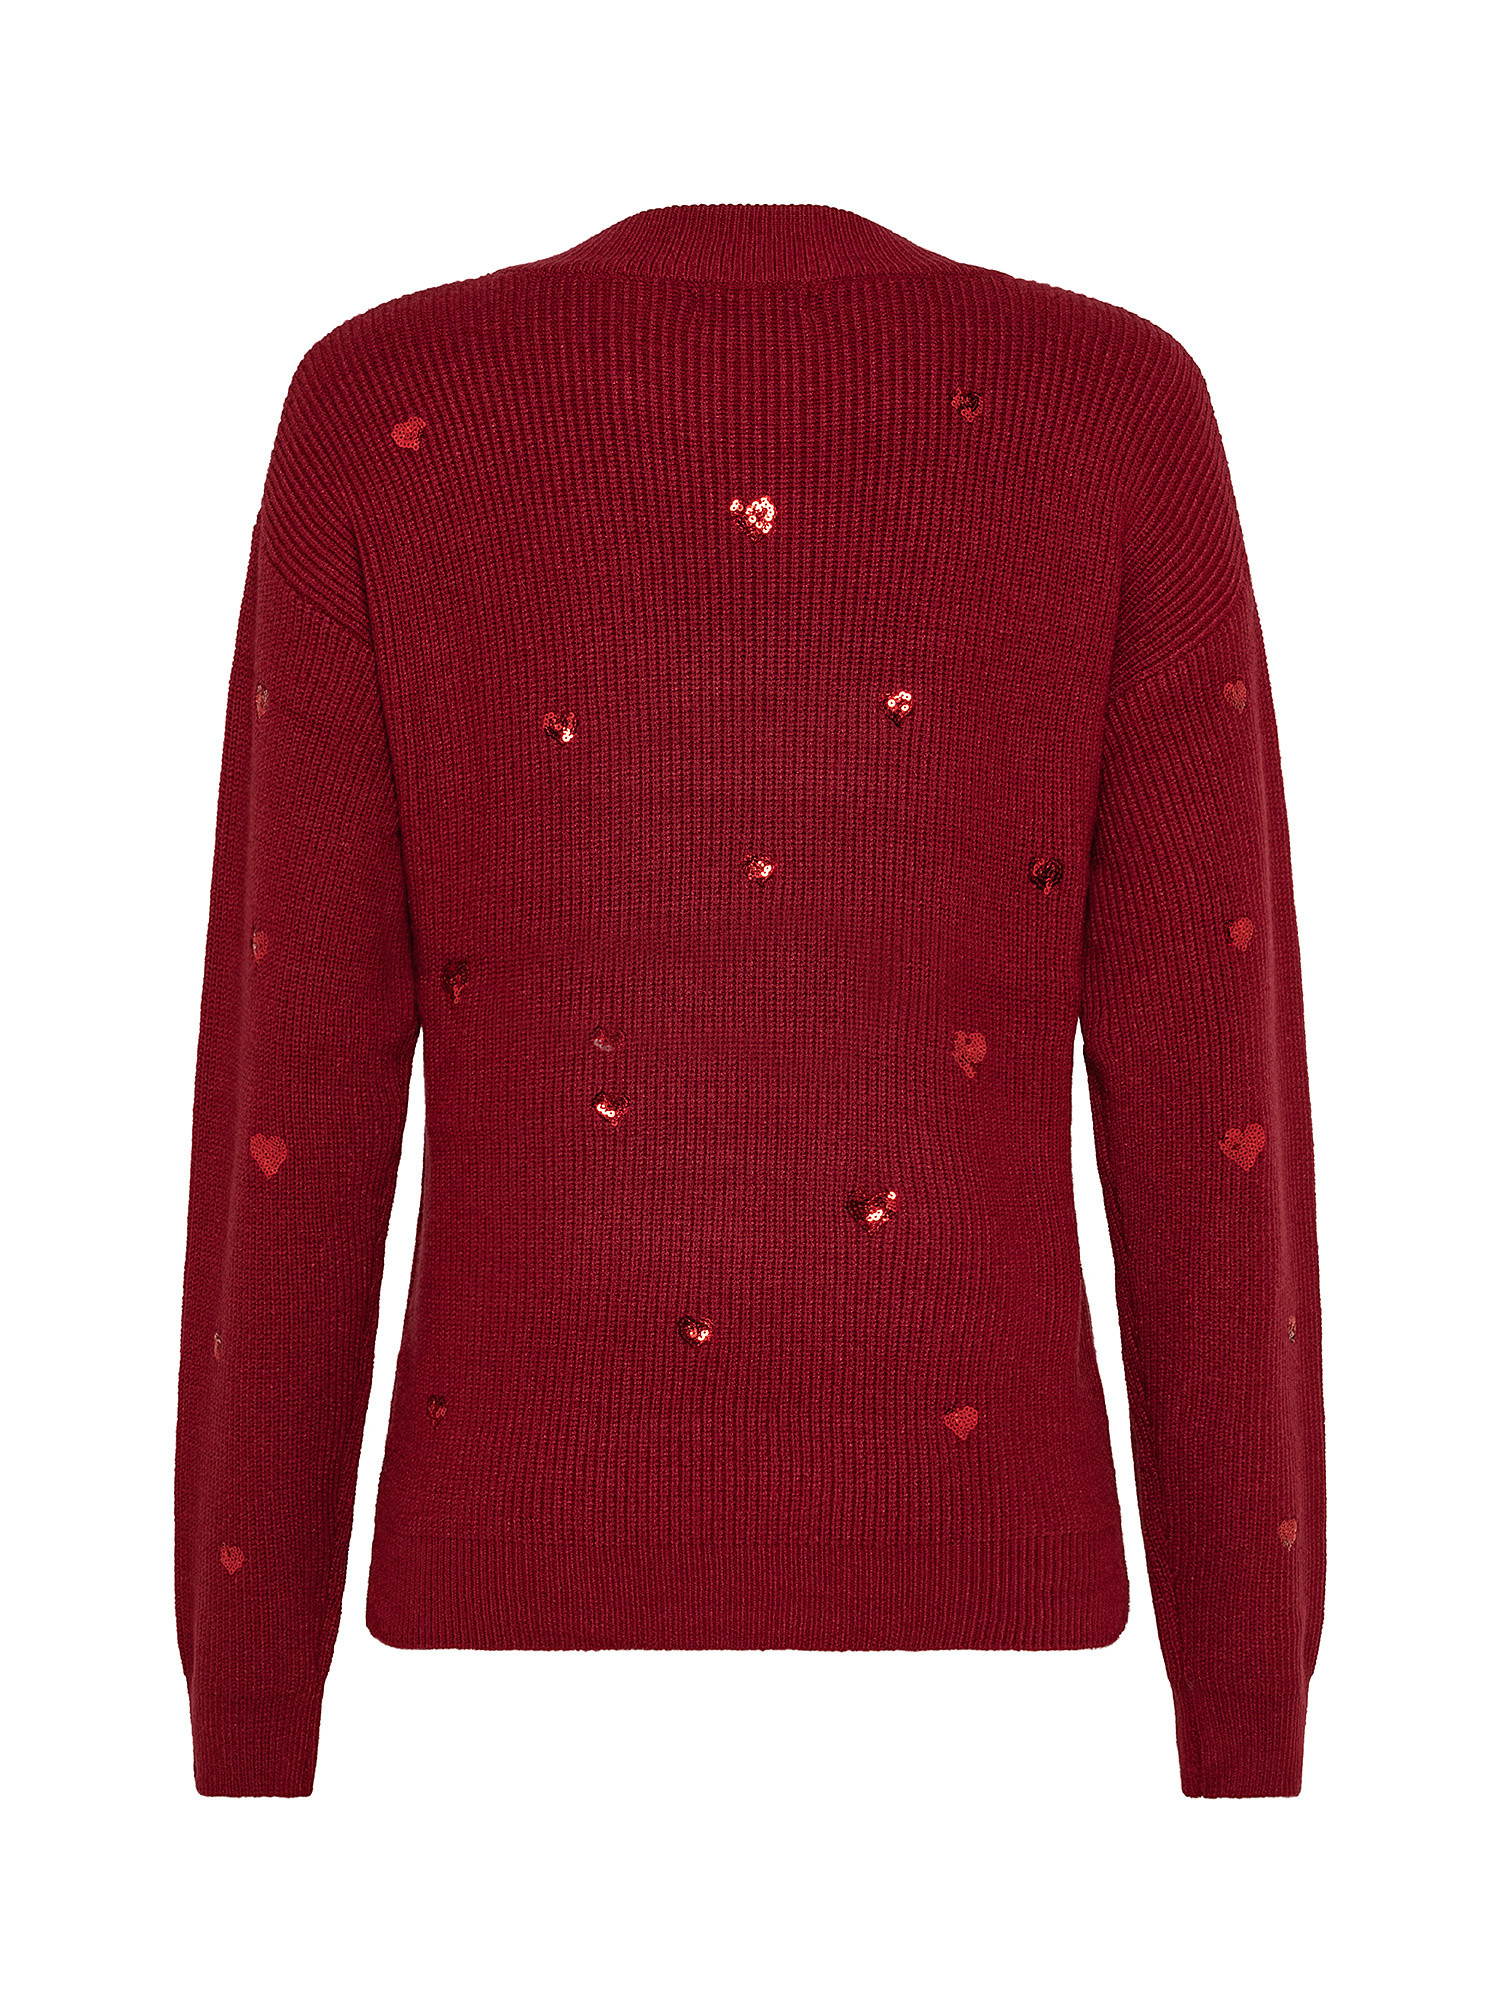 Sweater with sequined hearts, Red, large image number 1